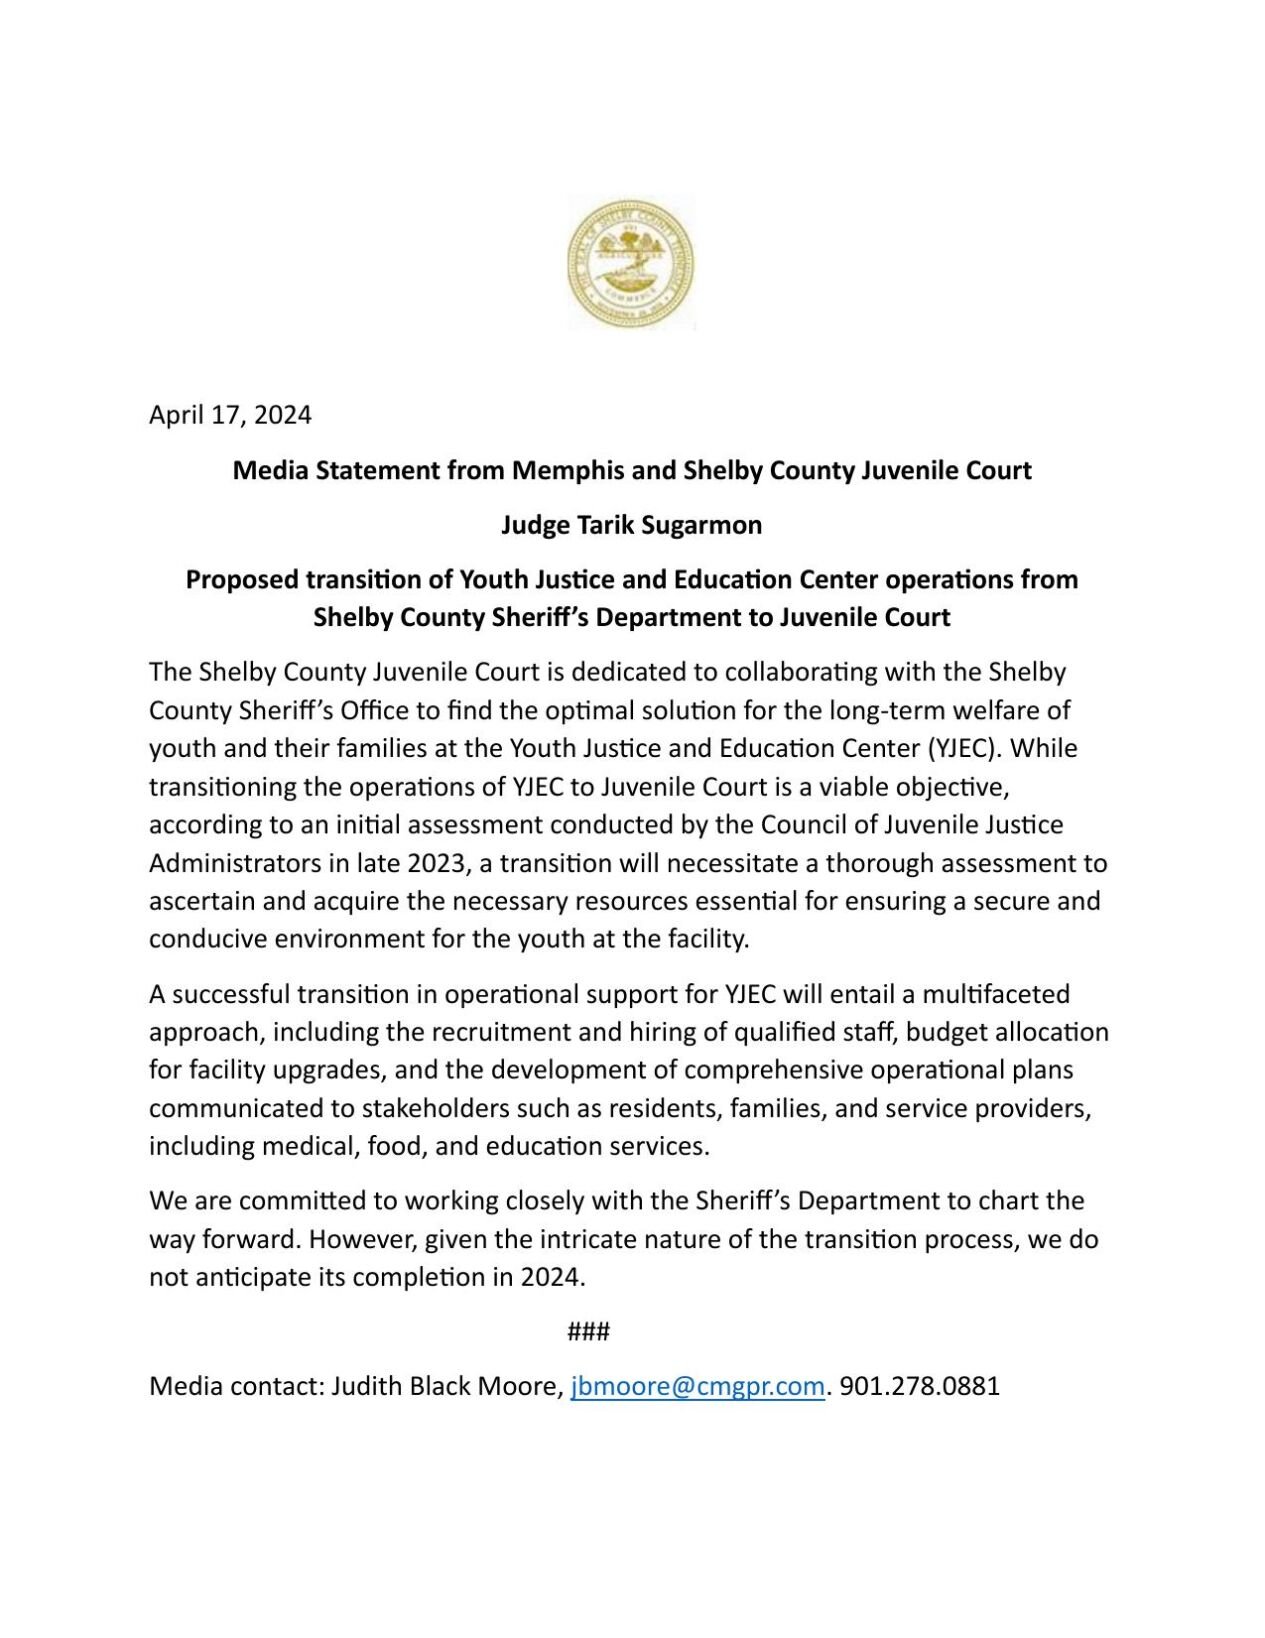 Juvenile Court Statement on Youth Center